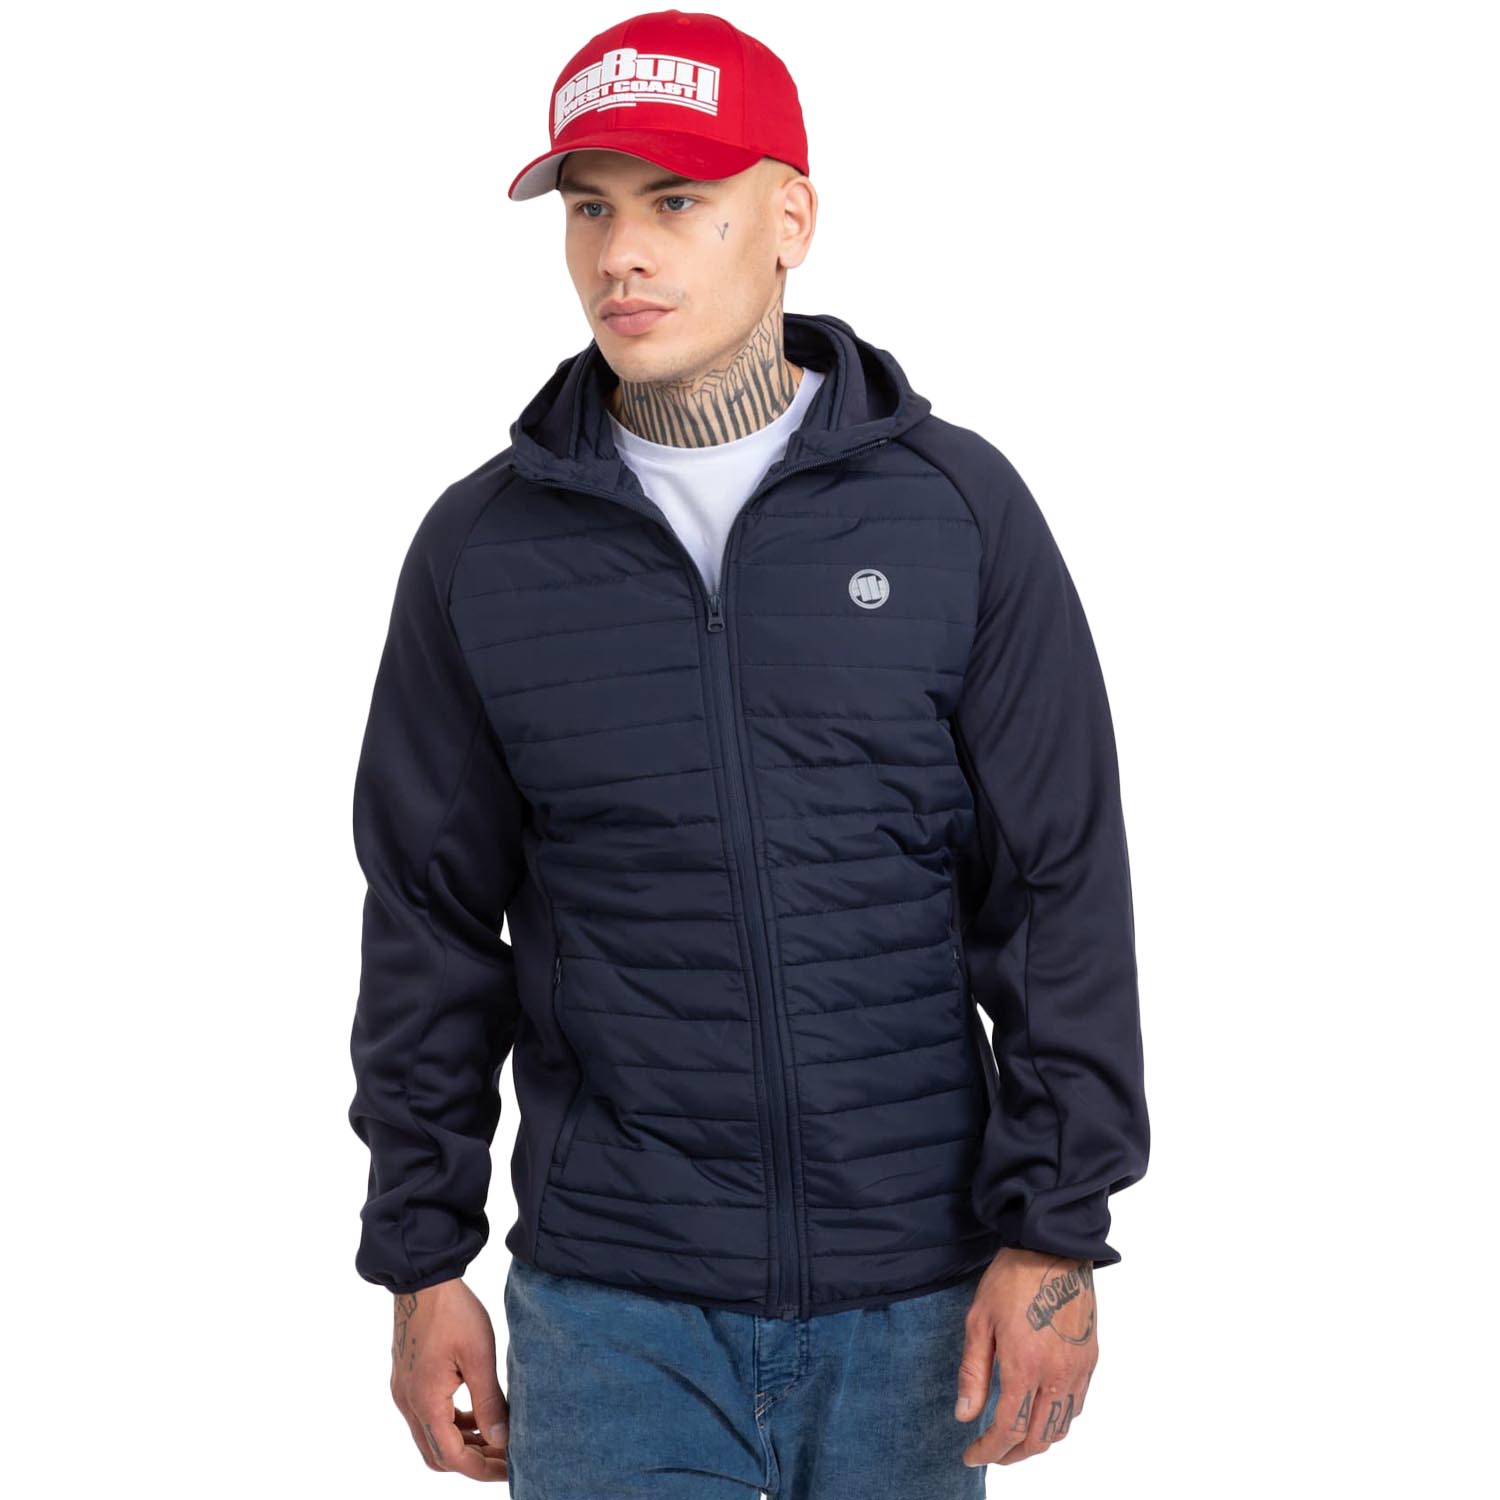 Pit Bull West Coast Jacke, Pacific, navy